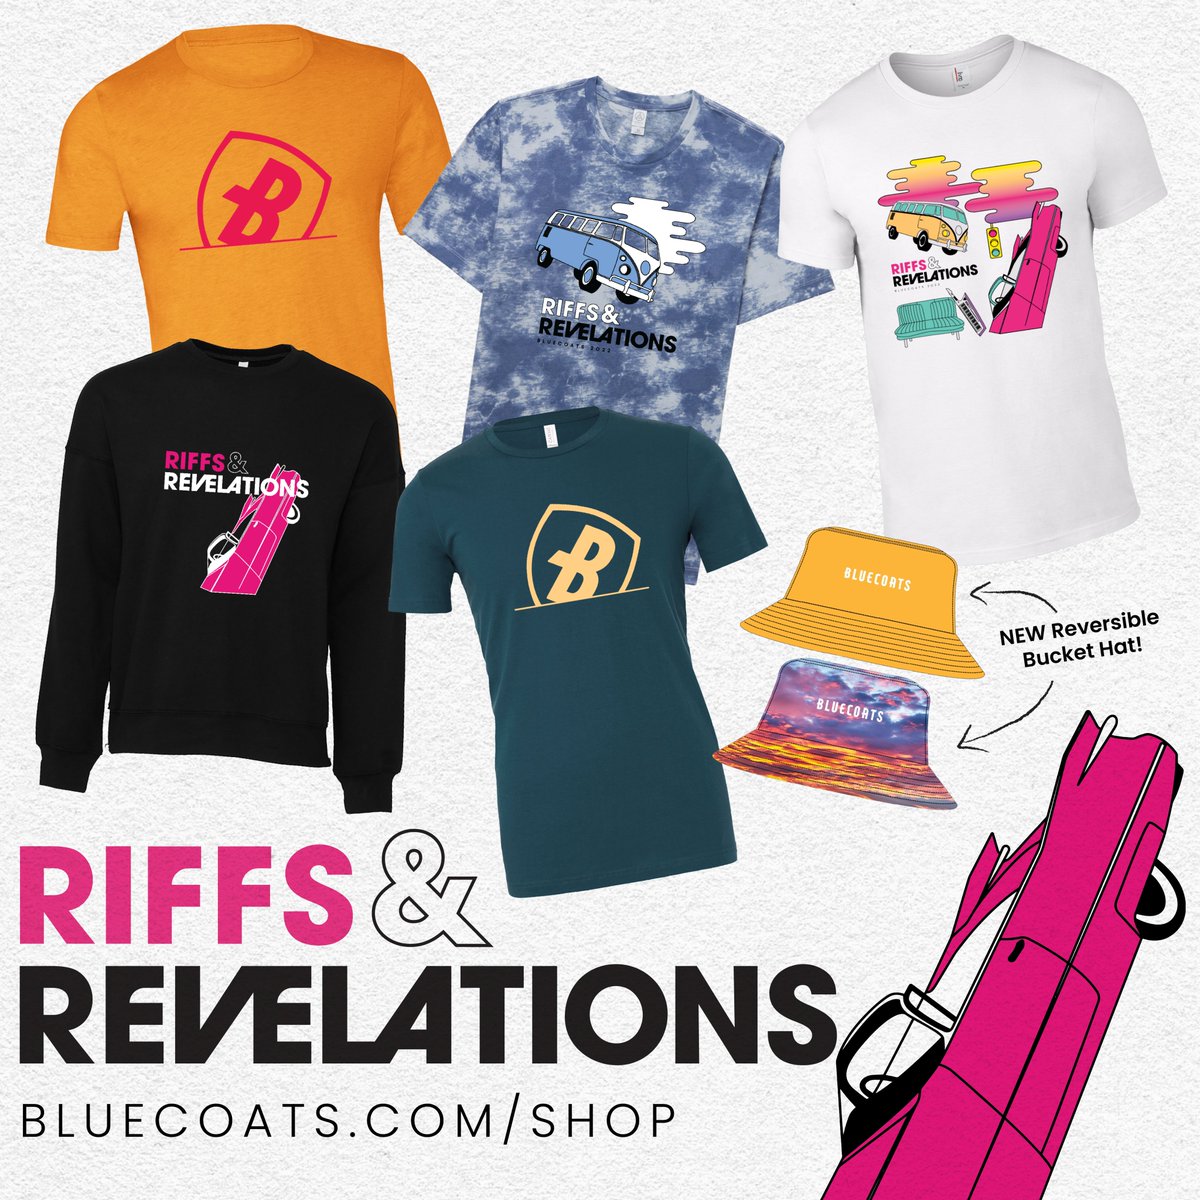 😍SALE AT THE BLUECOATS MARKETPLACE😍 Catch some awesome 2022 looks on sale at the Bluecoats Marketplace, including all Riffs & Revelations Apparel! Fill your cart with all your favorites at bluecoats.com/shop